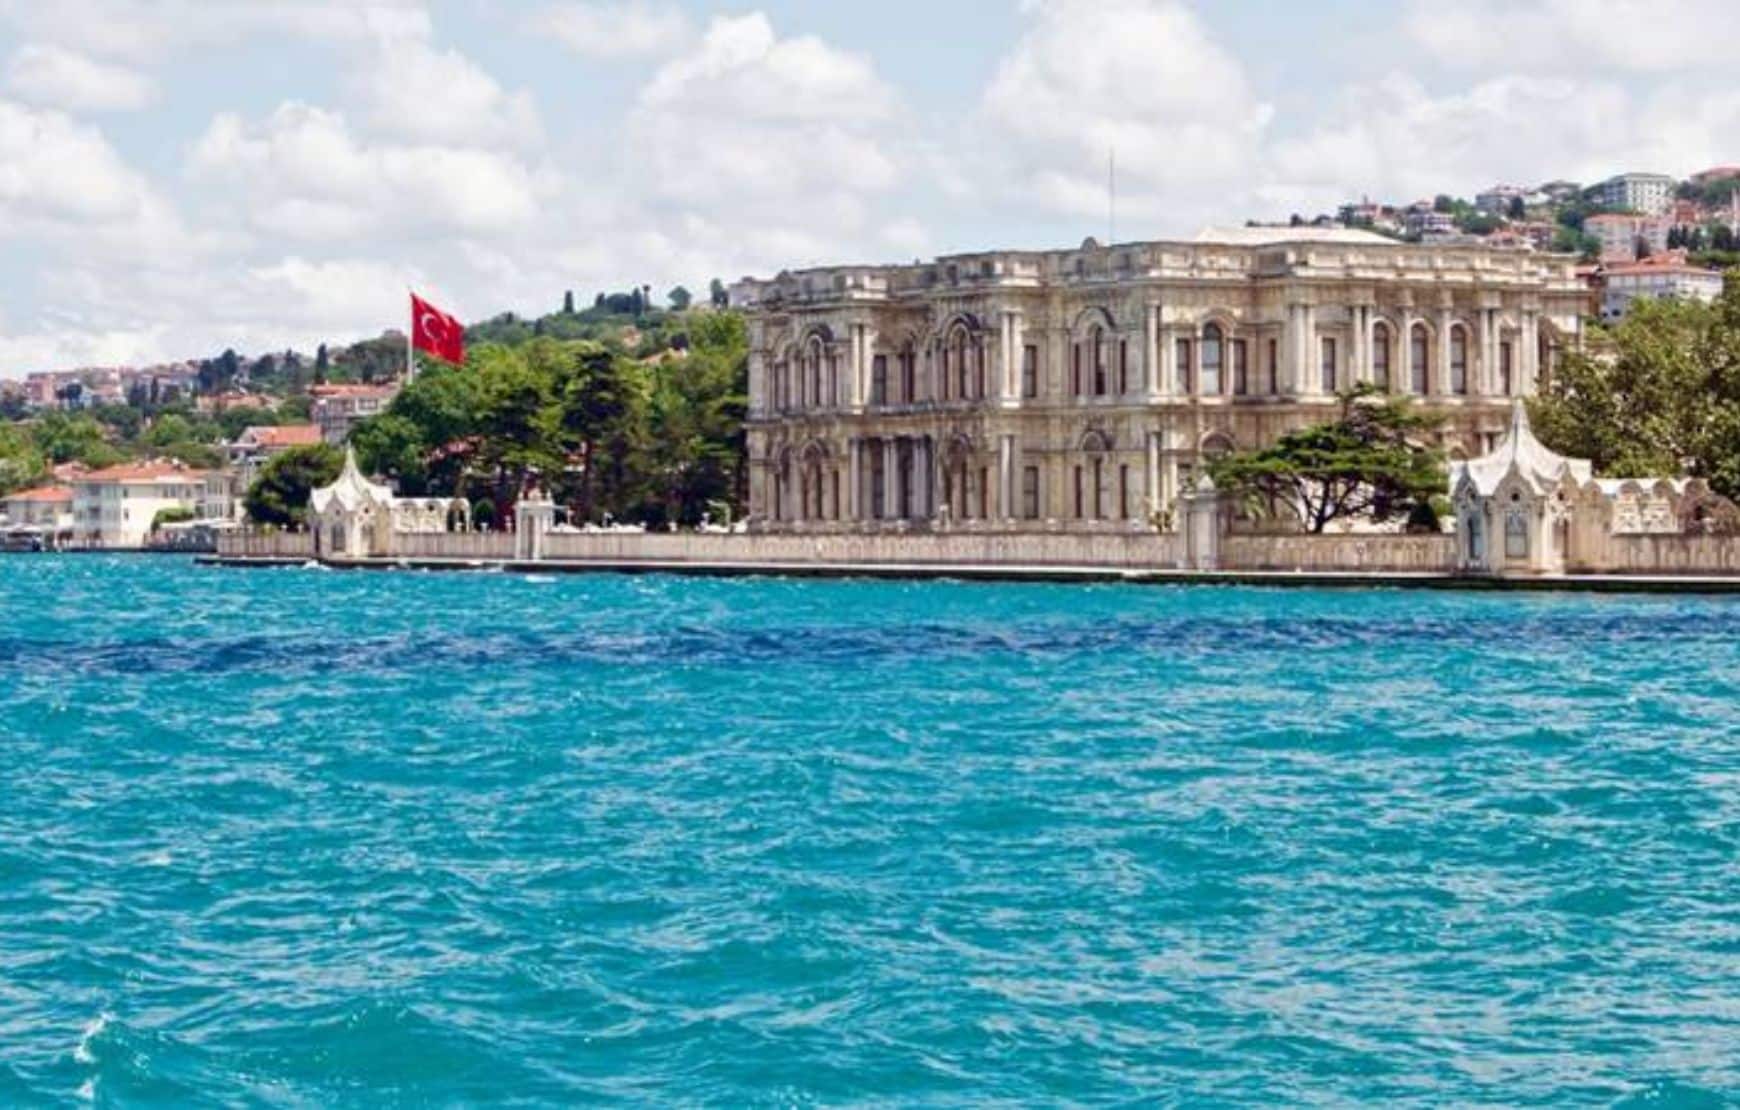 Bosphorus view of Ciragan Palace at our Istanbul Two Continents Tour